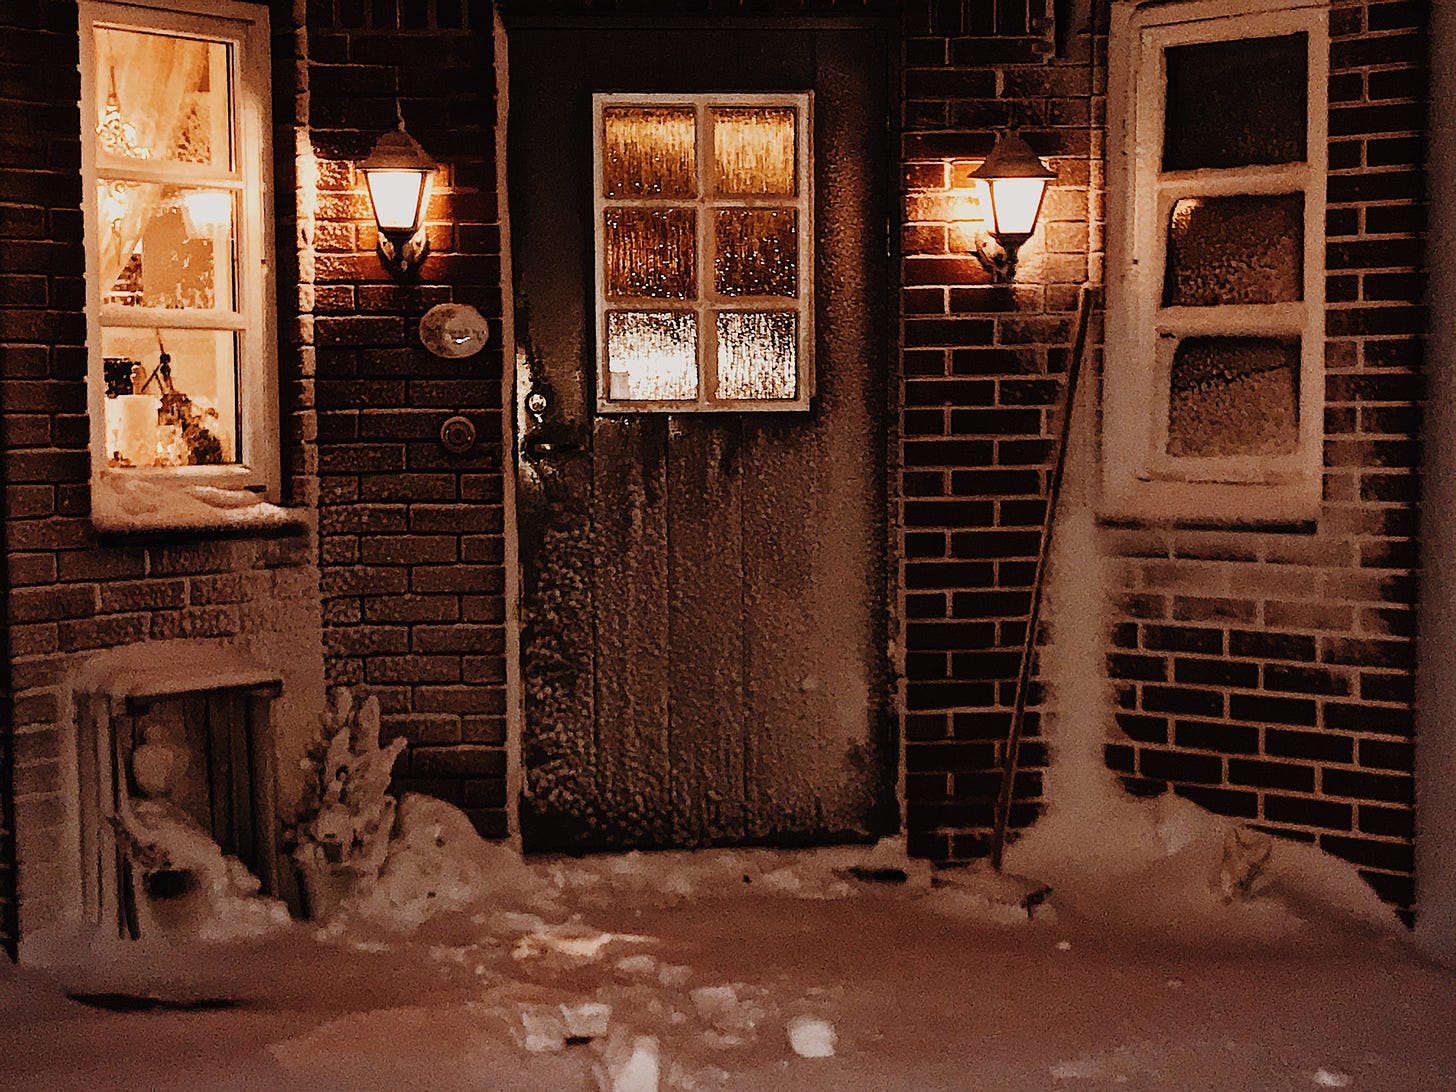 Brick building with windows and wall lights on either side of the front door. The ground and outside of the building are covered with snow. 